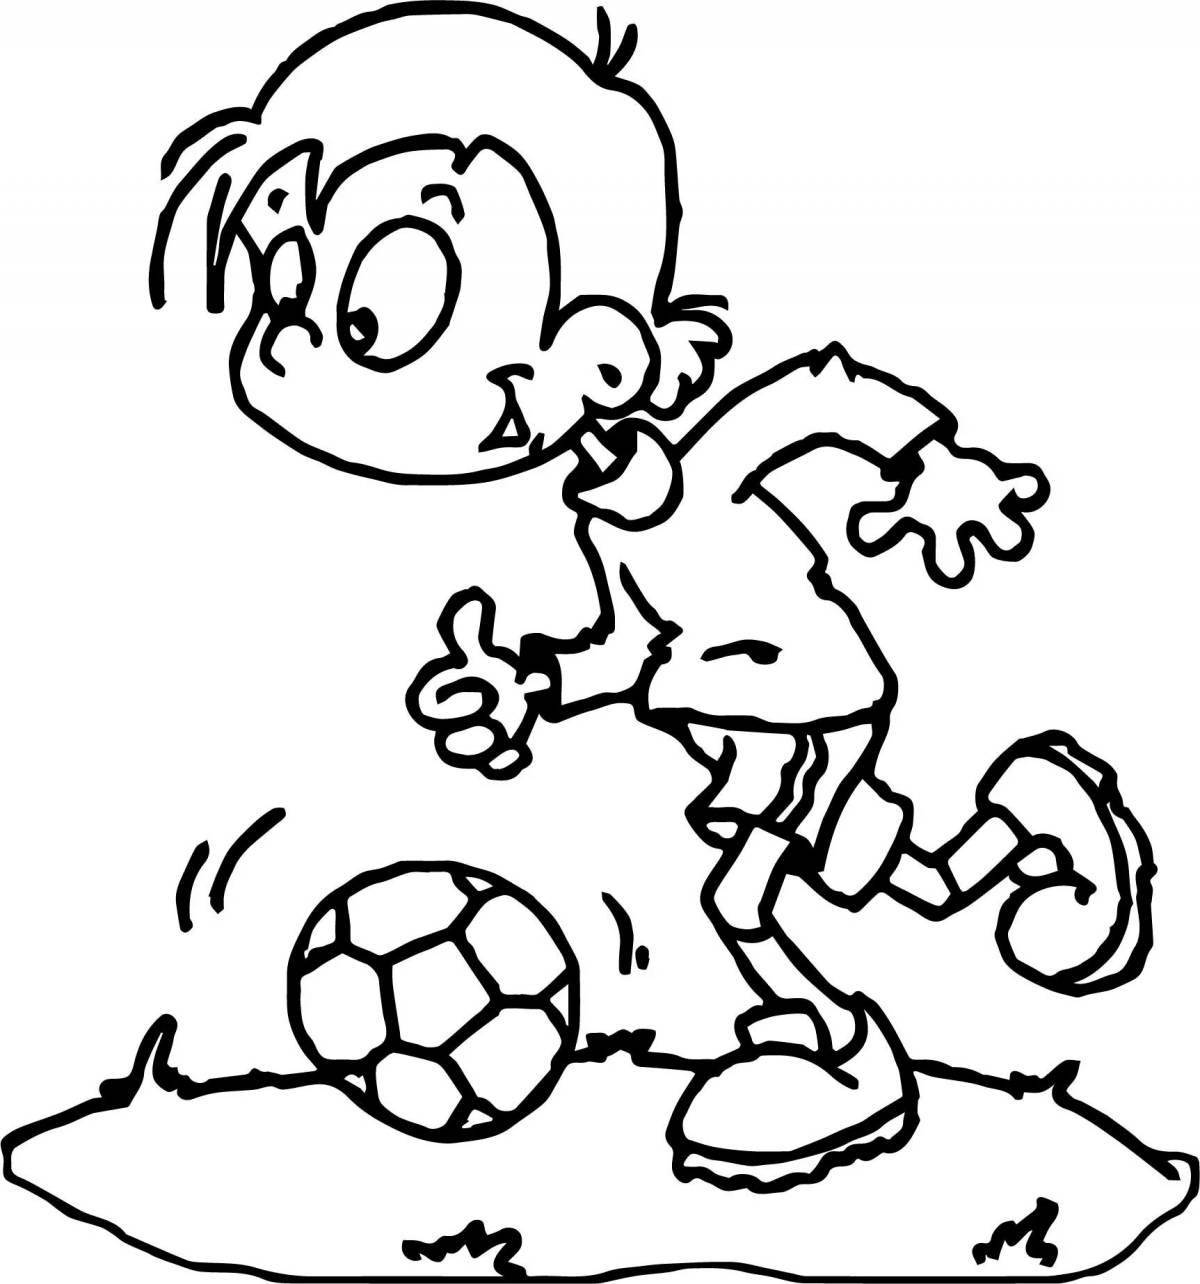 Coloring page enthusiastic boy playing football